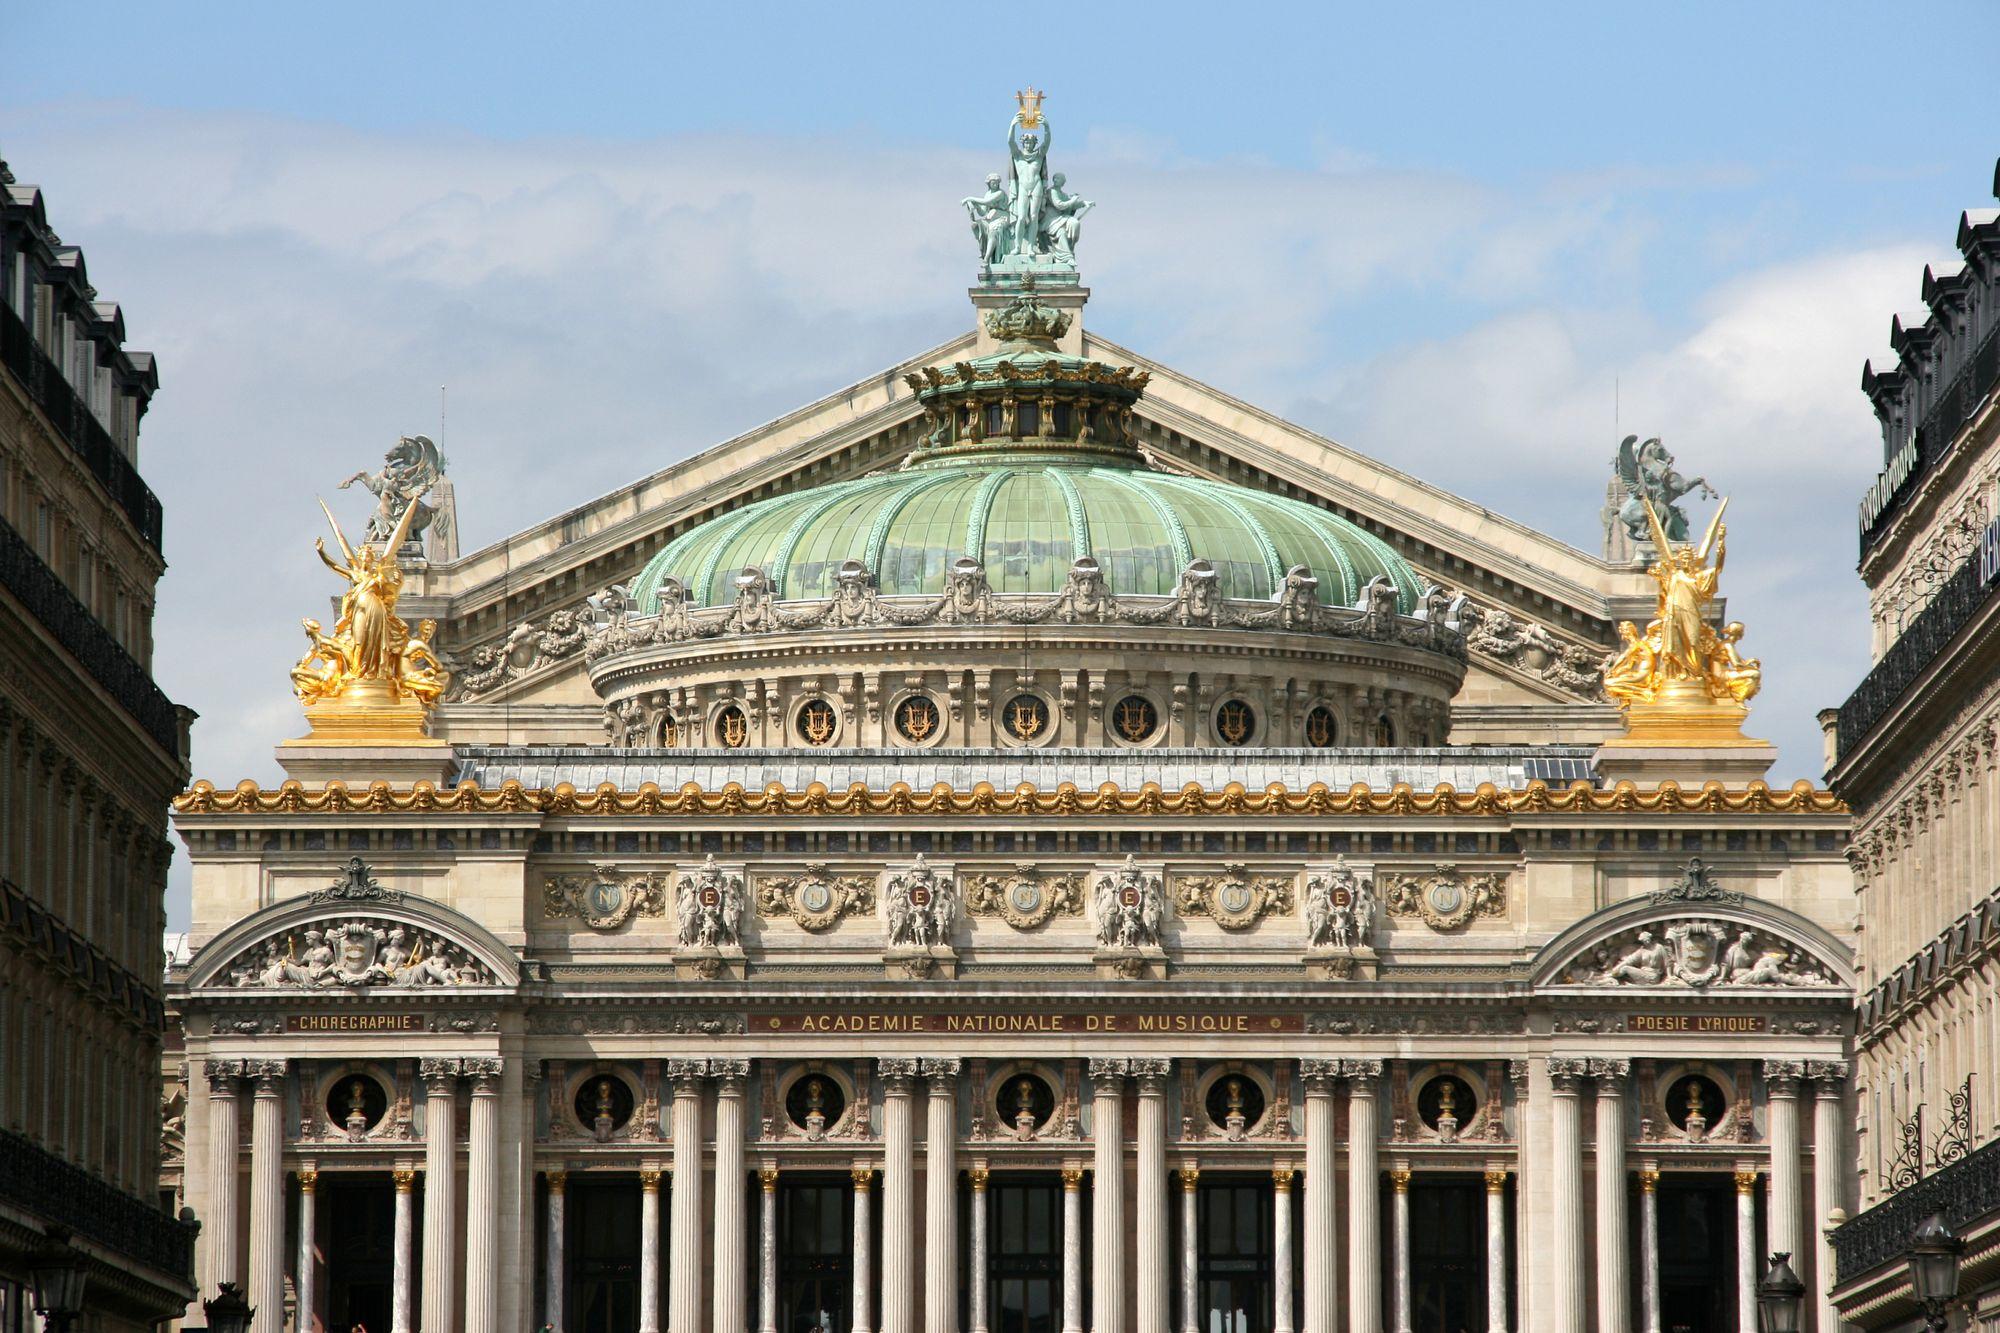 At 400m walk from the Hotel Gramont Paris, the Opera Garnier, inaugurated in 1875, stands as an emblem, in the heart of the culture and the history of the city.